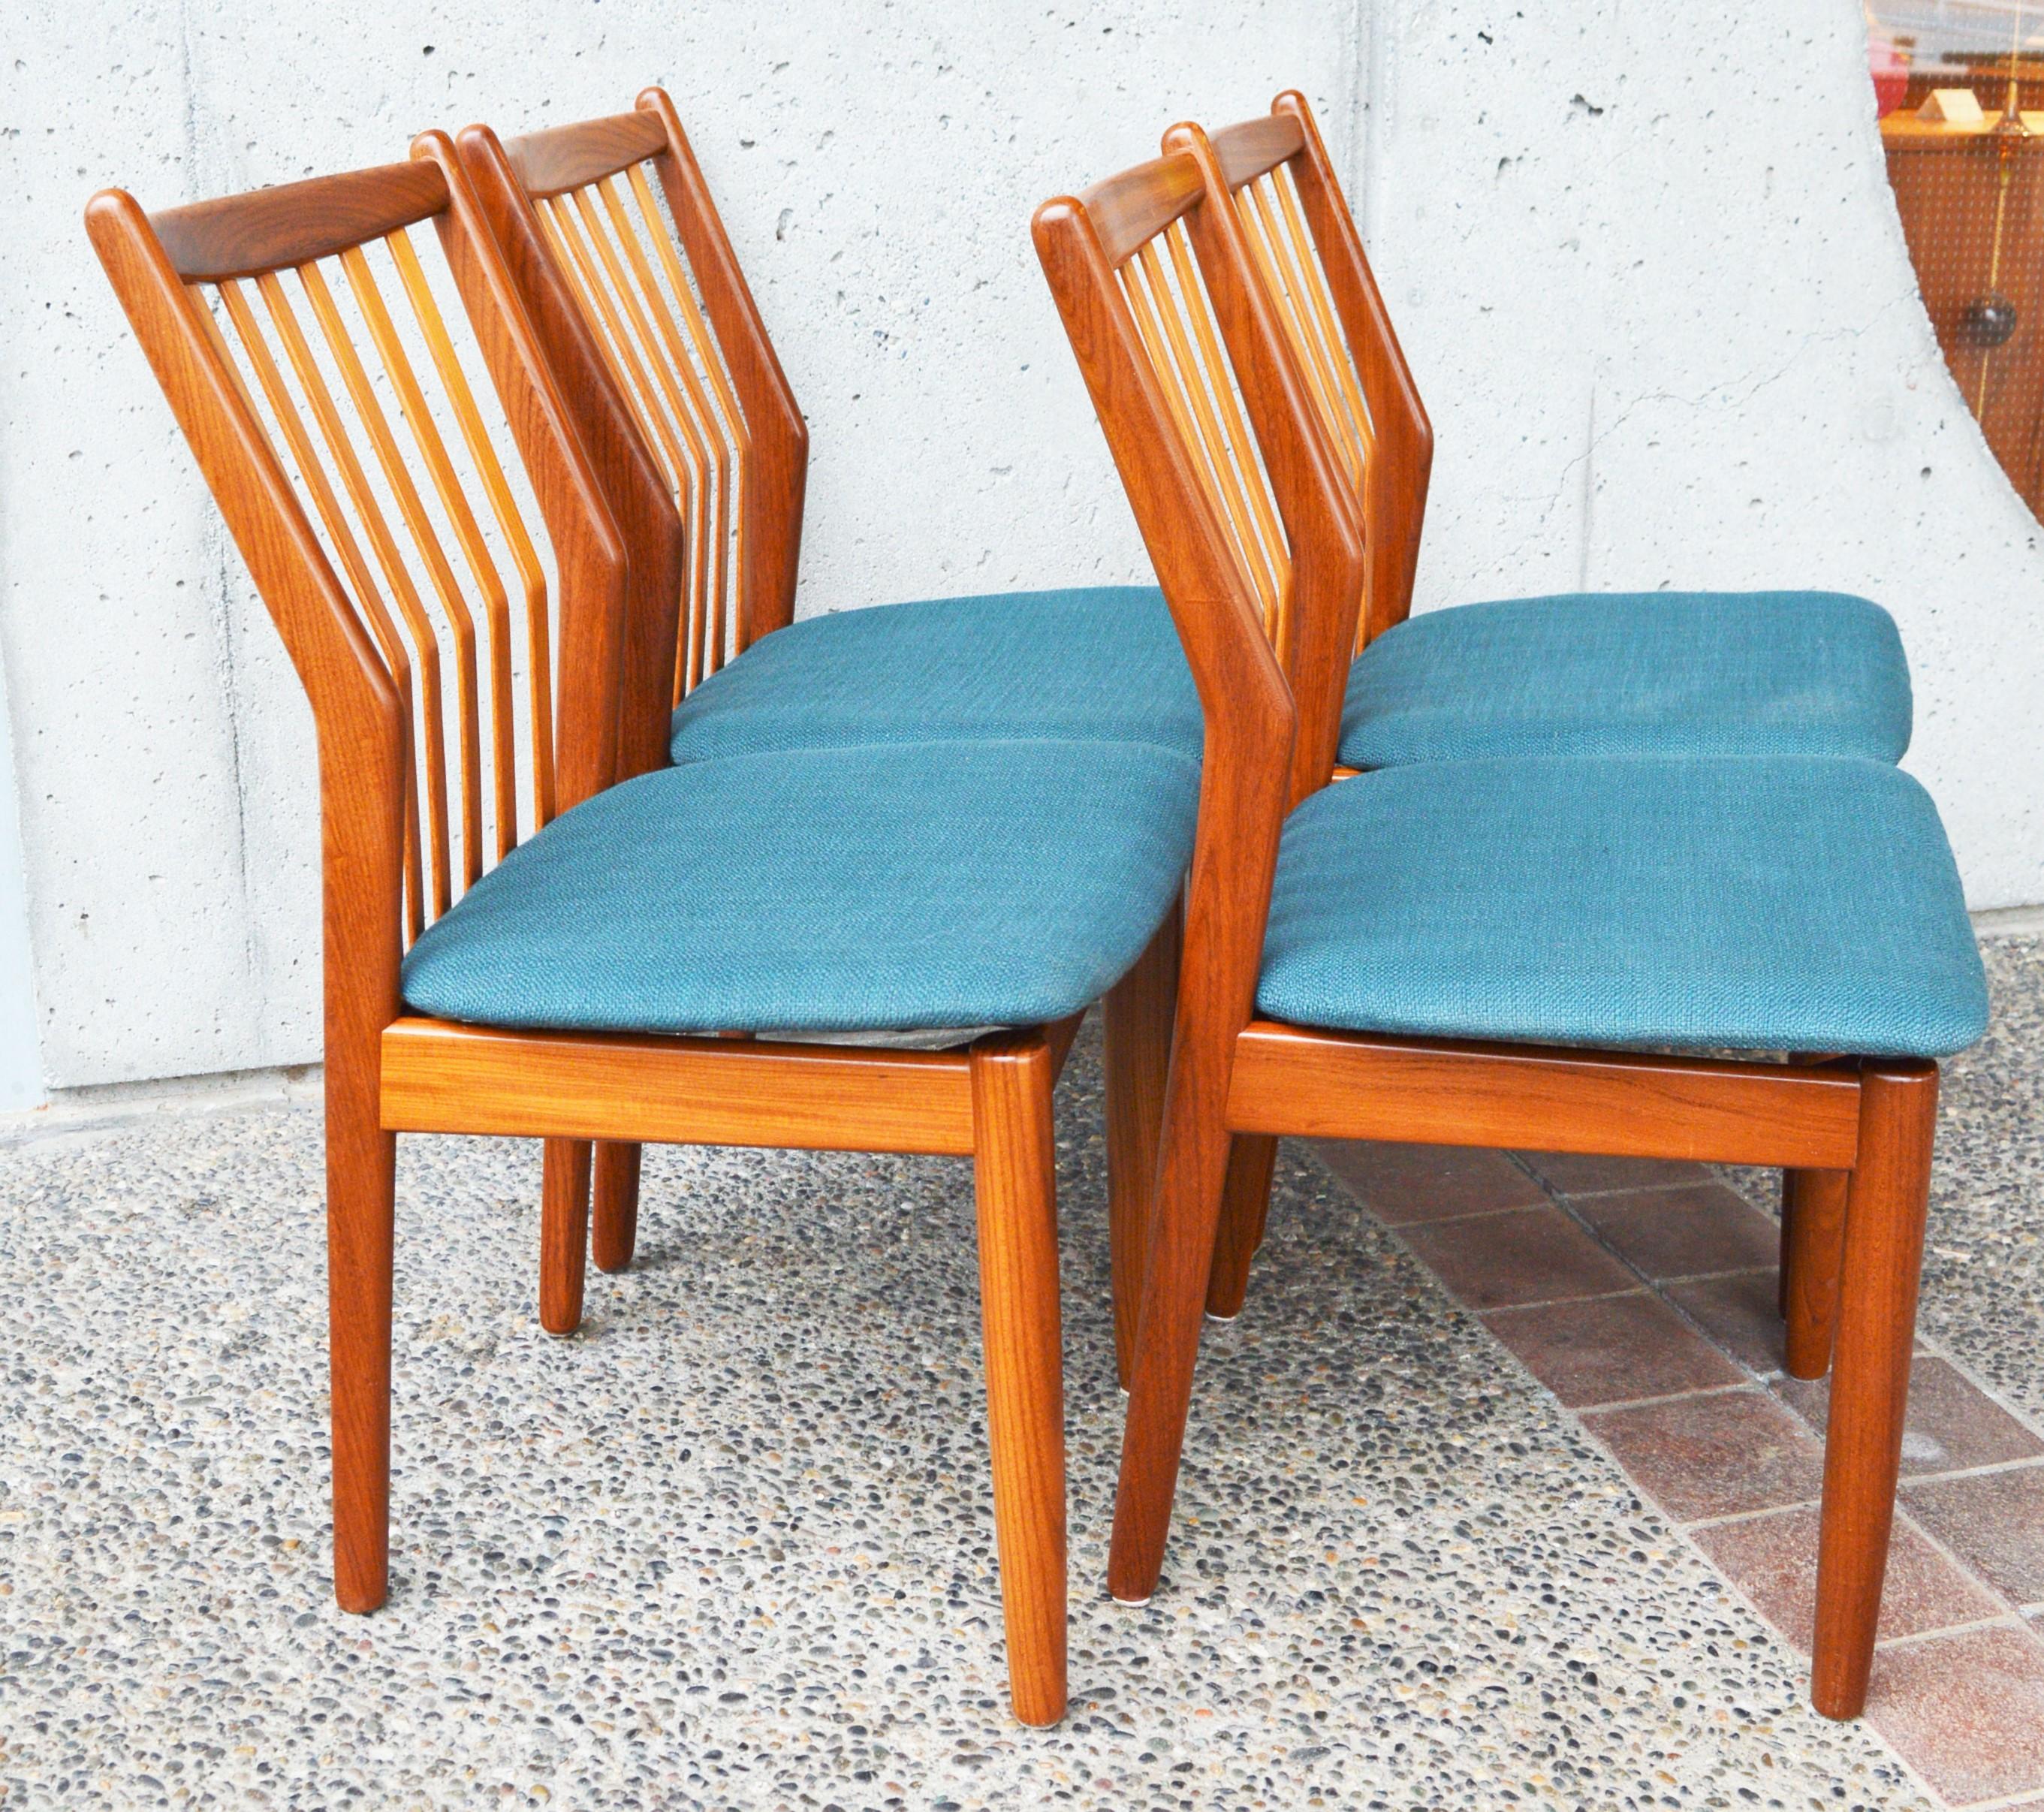 Svend Madsen Set of 4 Danish Teak Dining Chairs with Bent Backs & New Teal Tweed In Good Condition For Sale In New Westminster, British Columbia